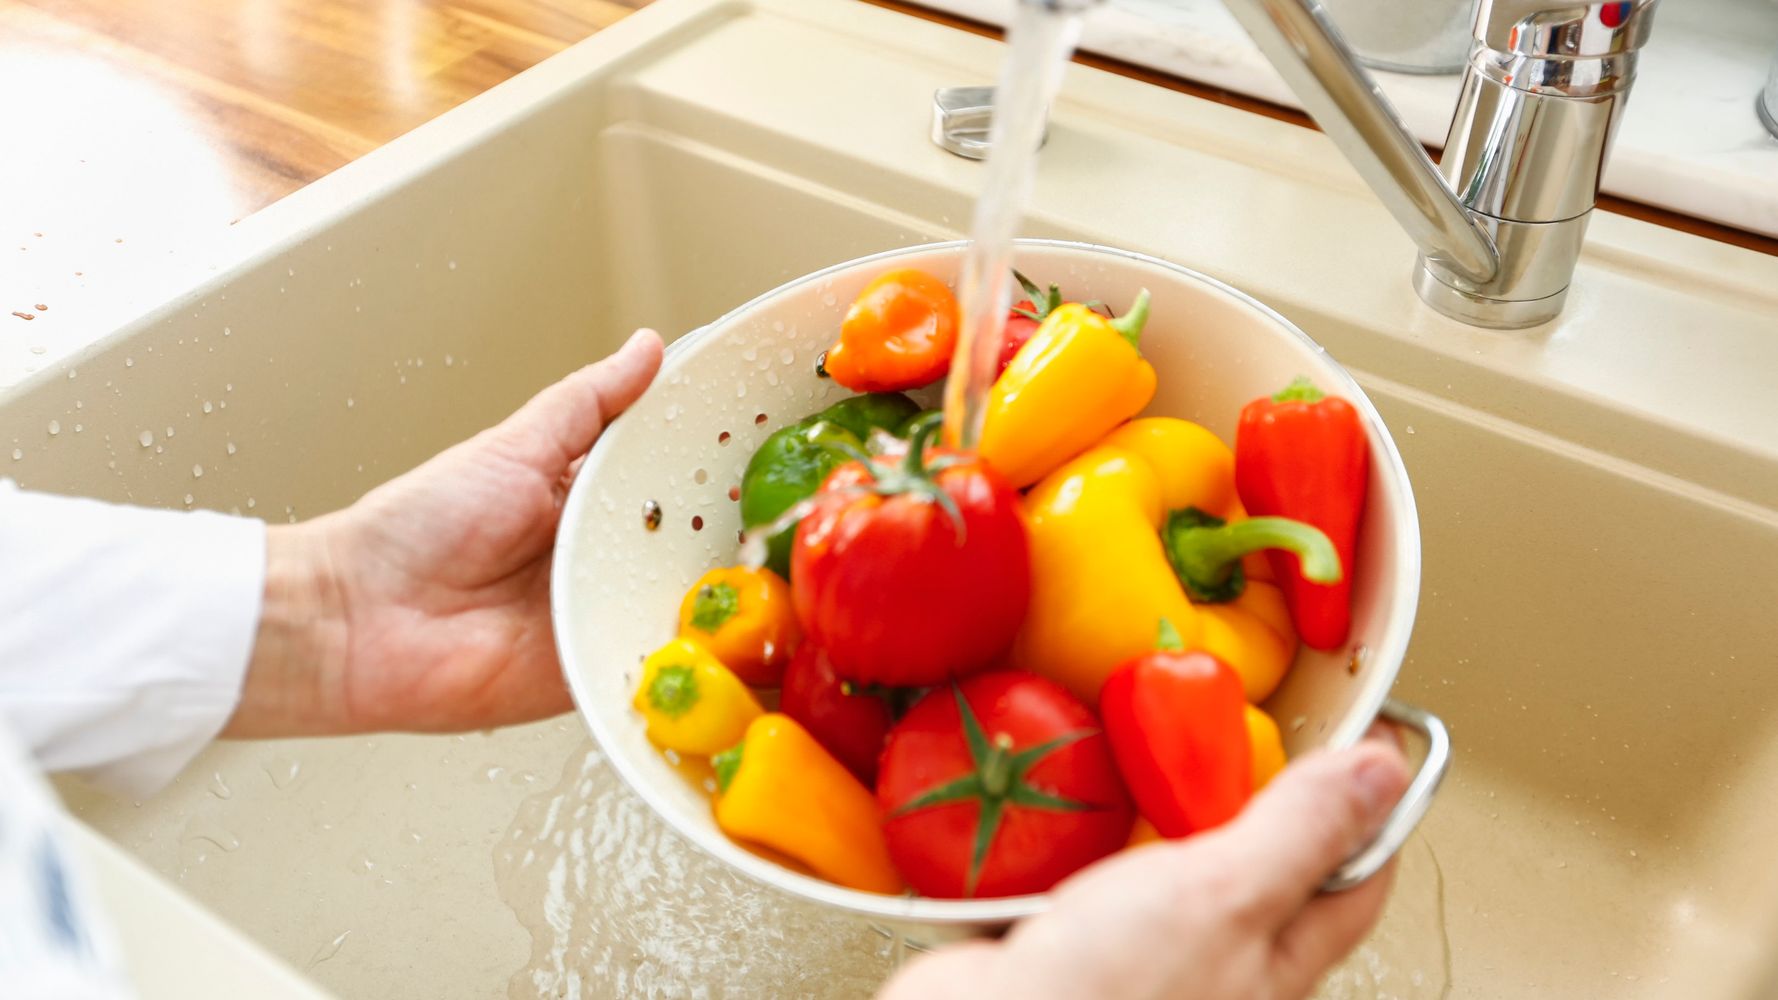 Why washing fruits and veggies with water is not enough – Koparo Clean